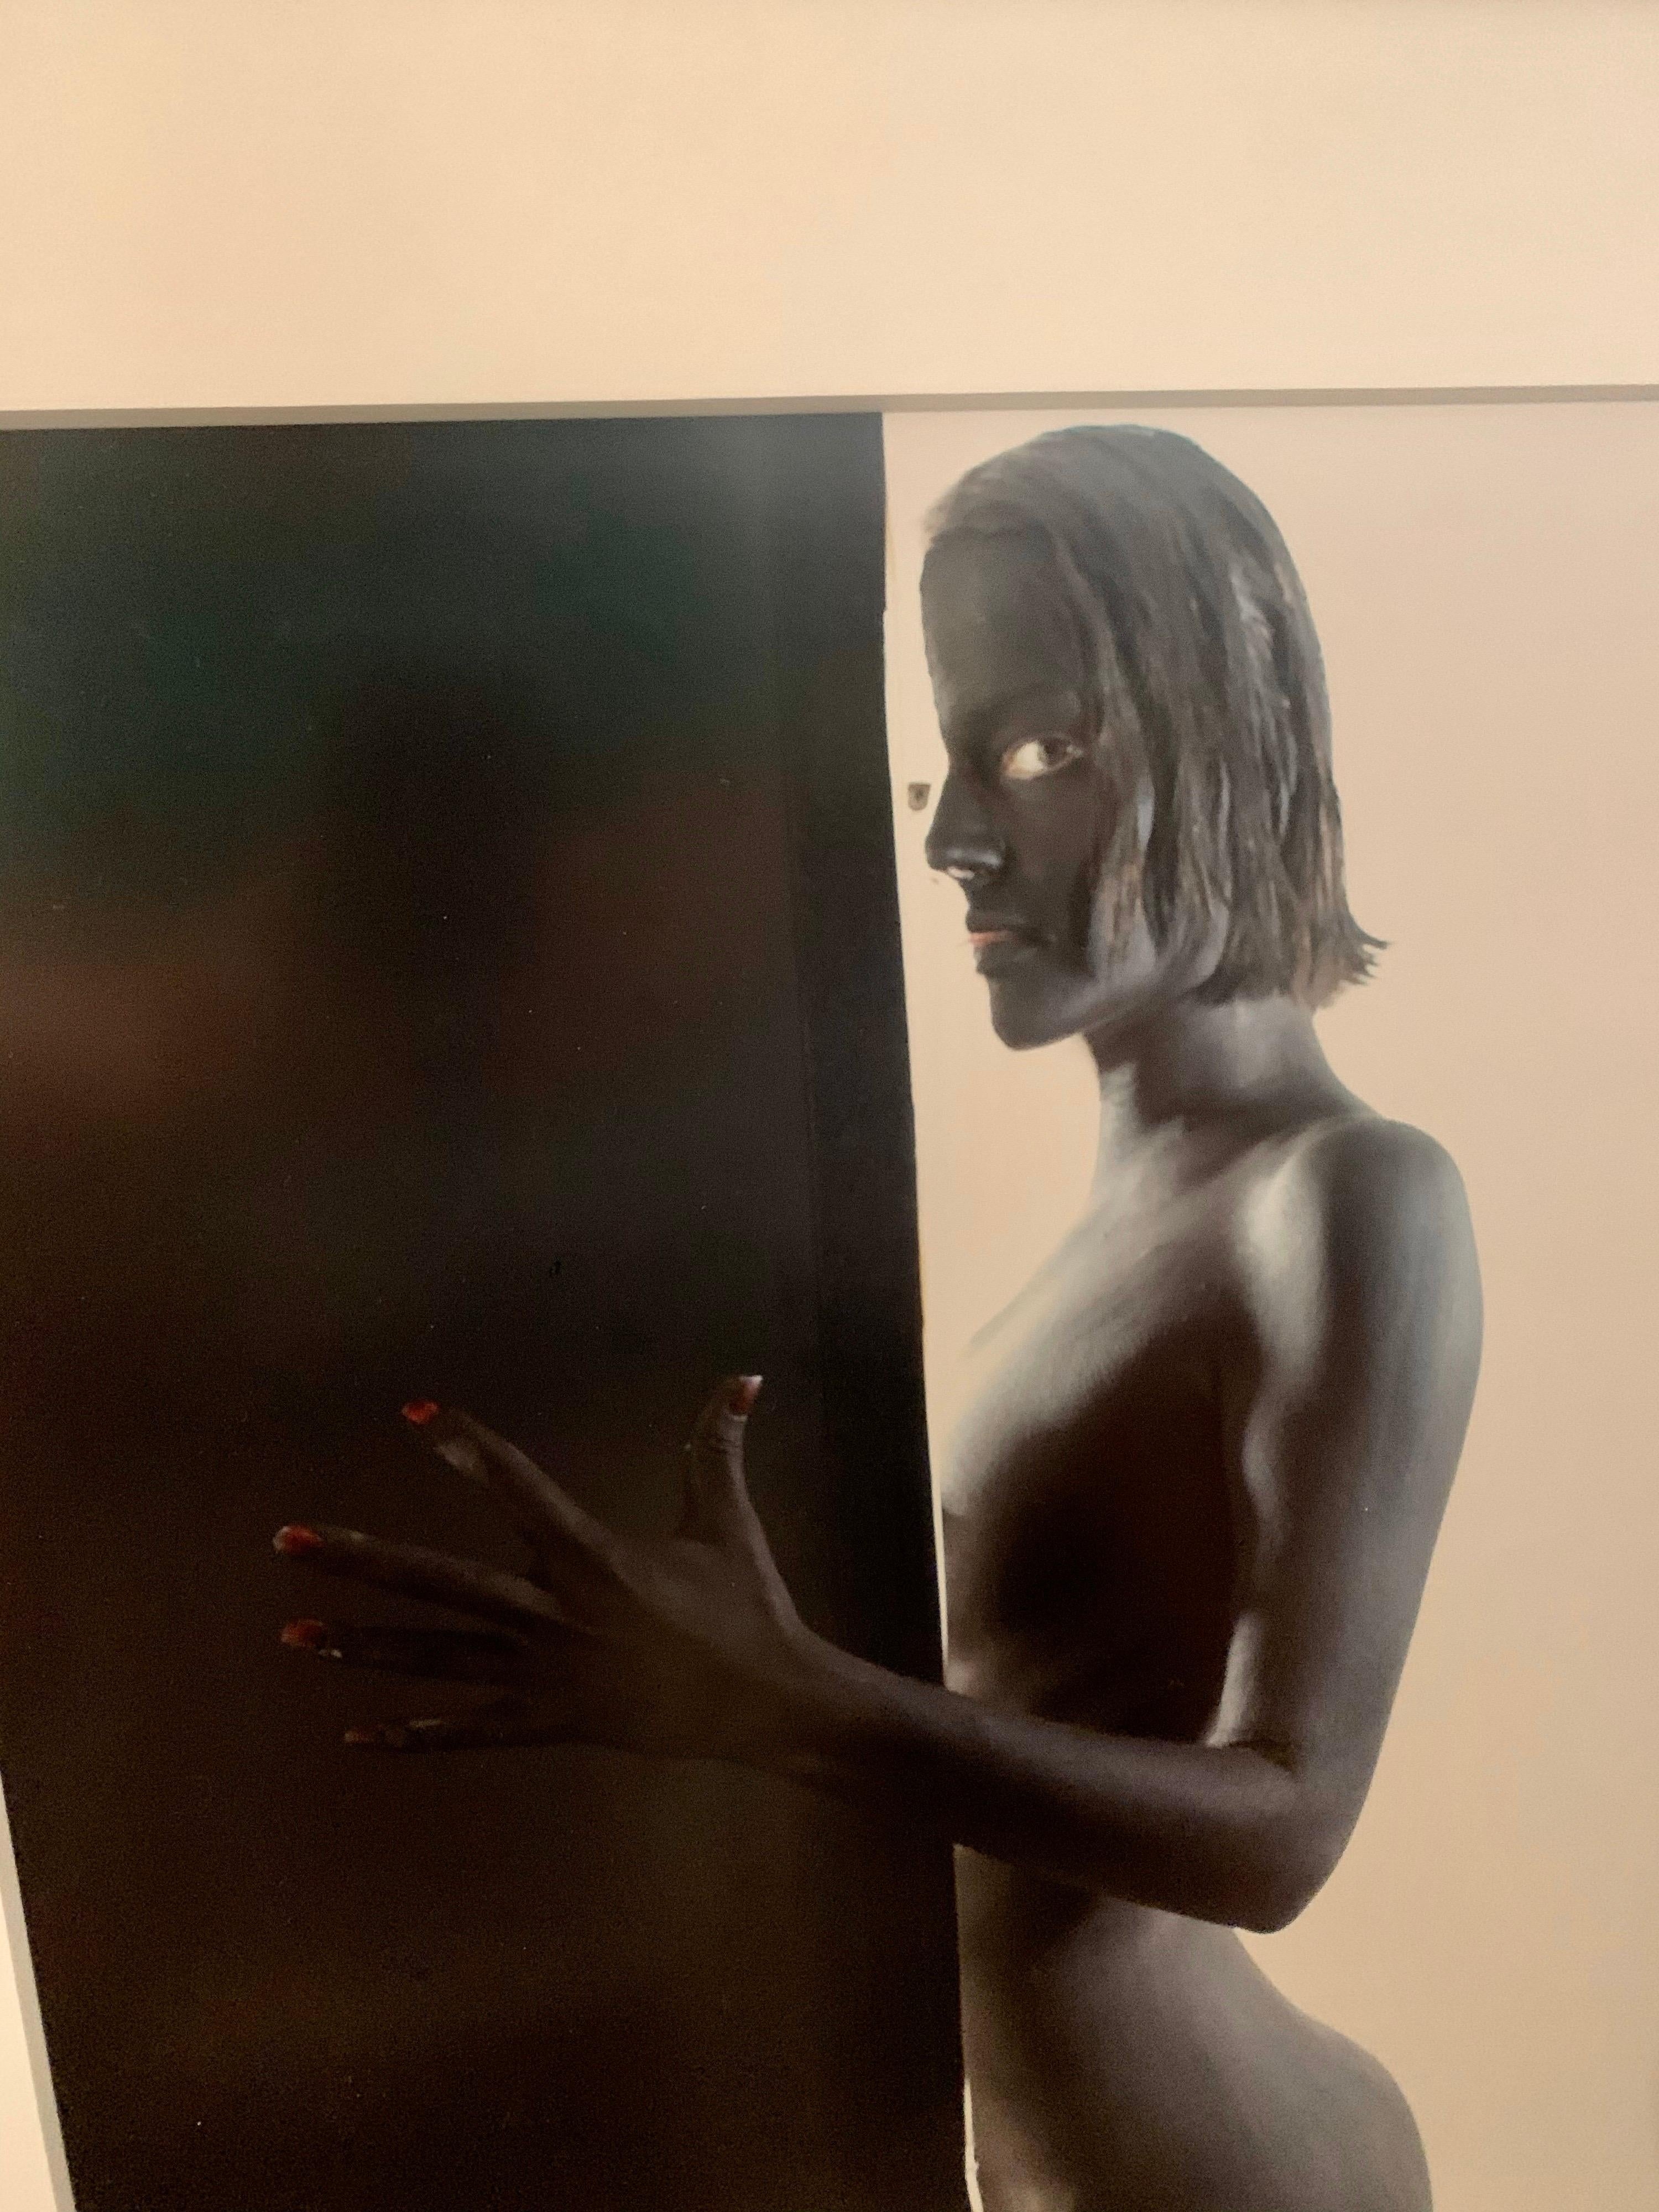 This is a series of three (3) - all of which is Mona, the photographer's Muse and model. This is a fully painted body in black and white. Original framing in white.